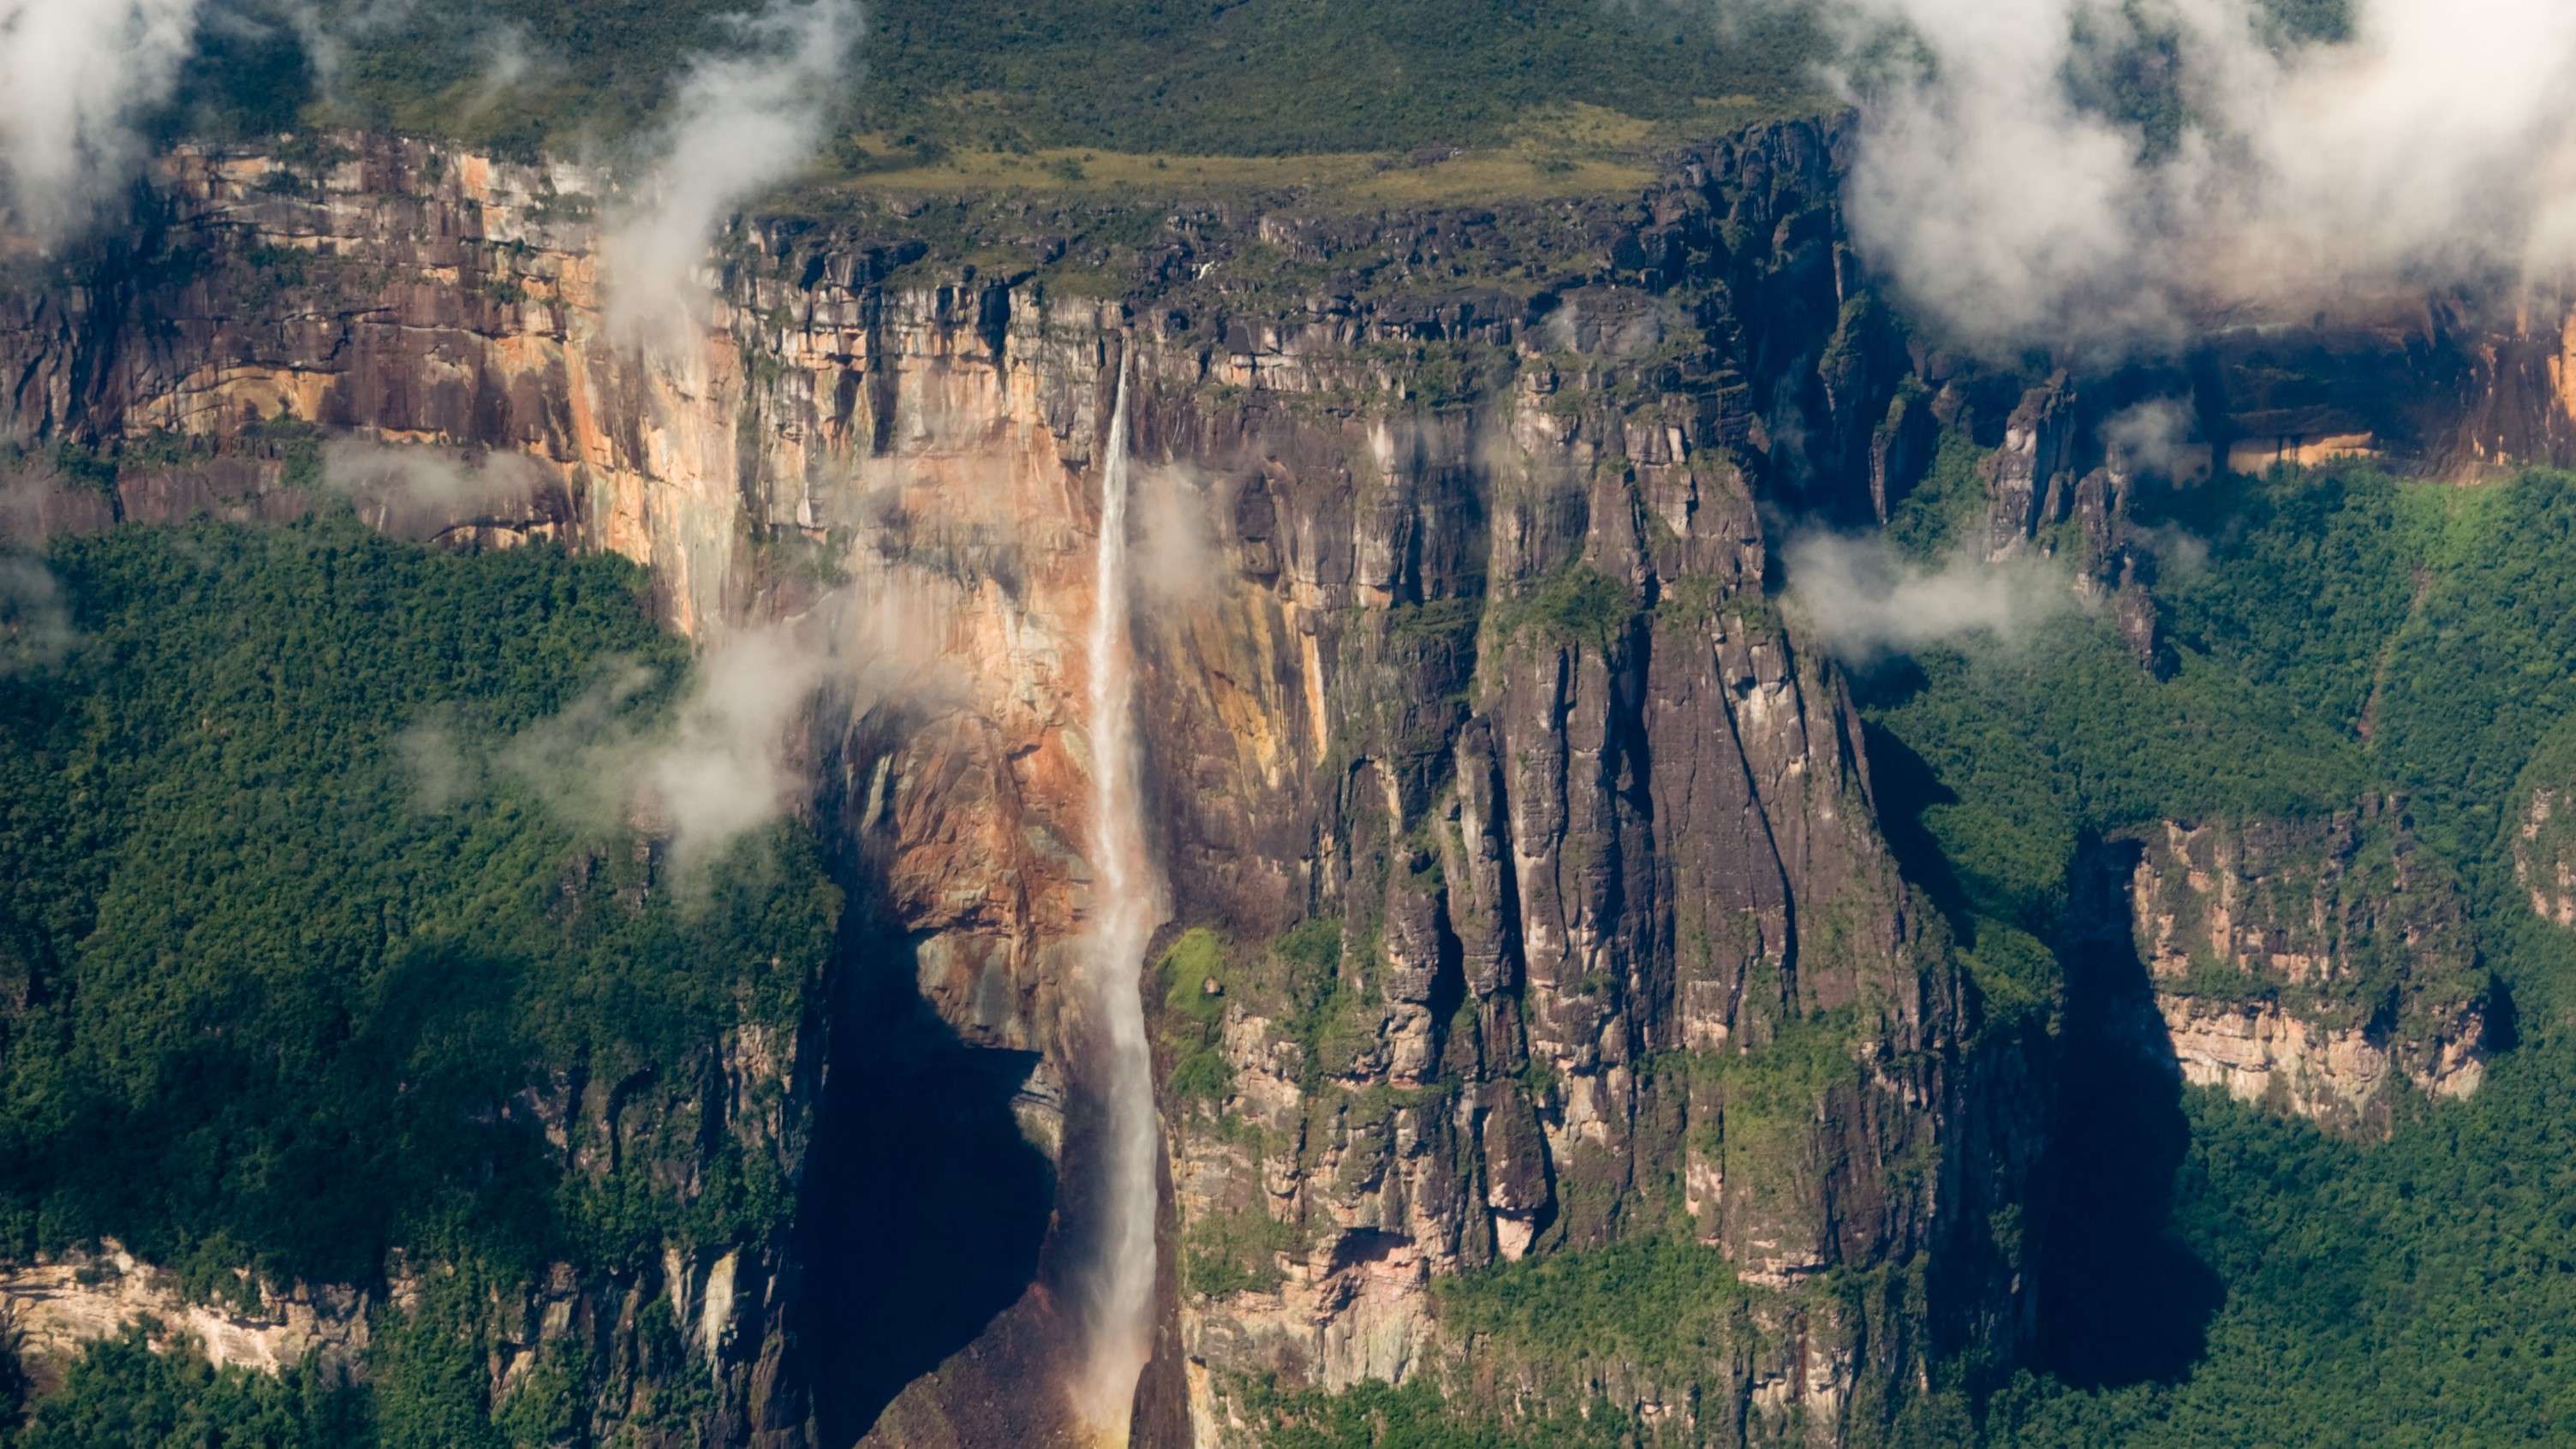 What's the largest waterfall in the world?